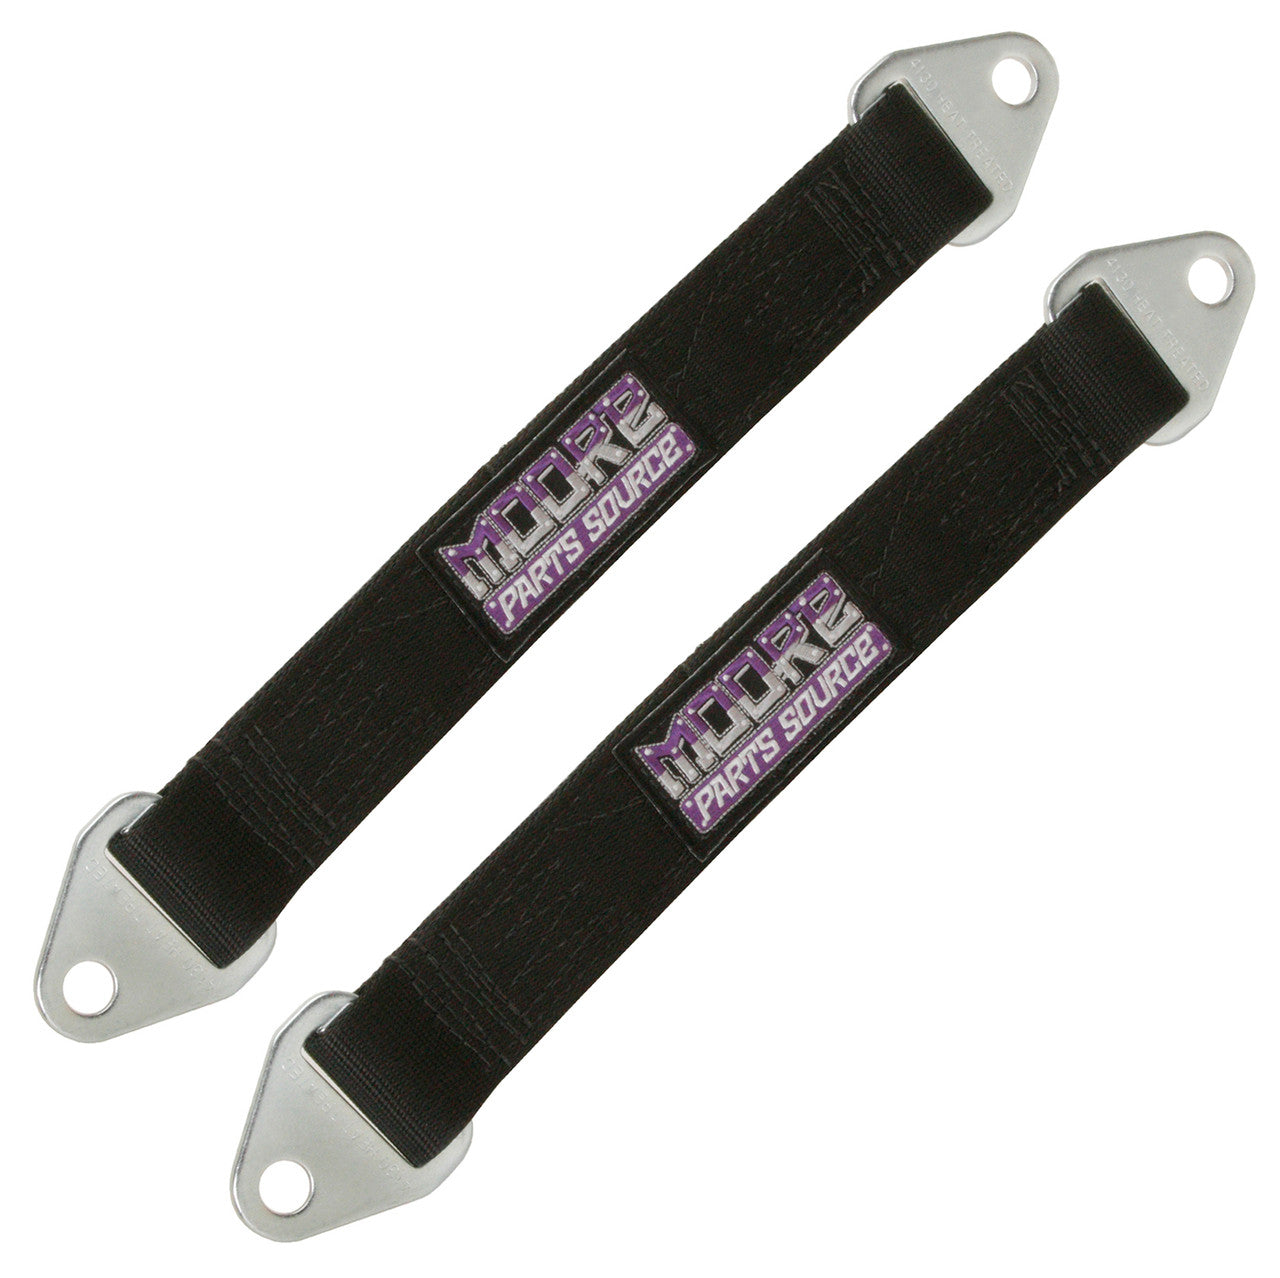 10 Inch USA Made Off-Road Suspension Limit Straps, Sold As Pair